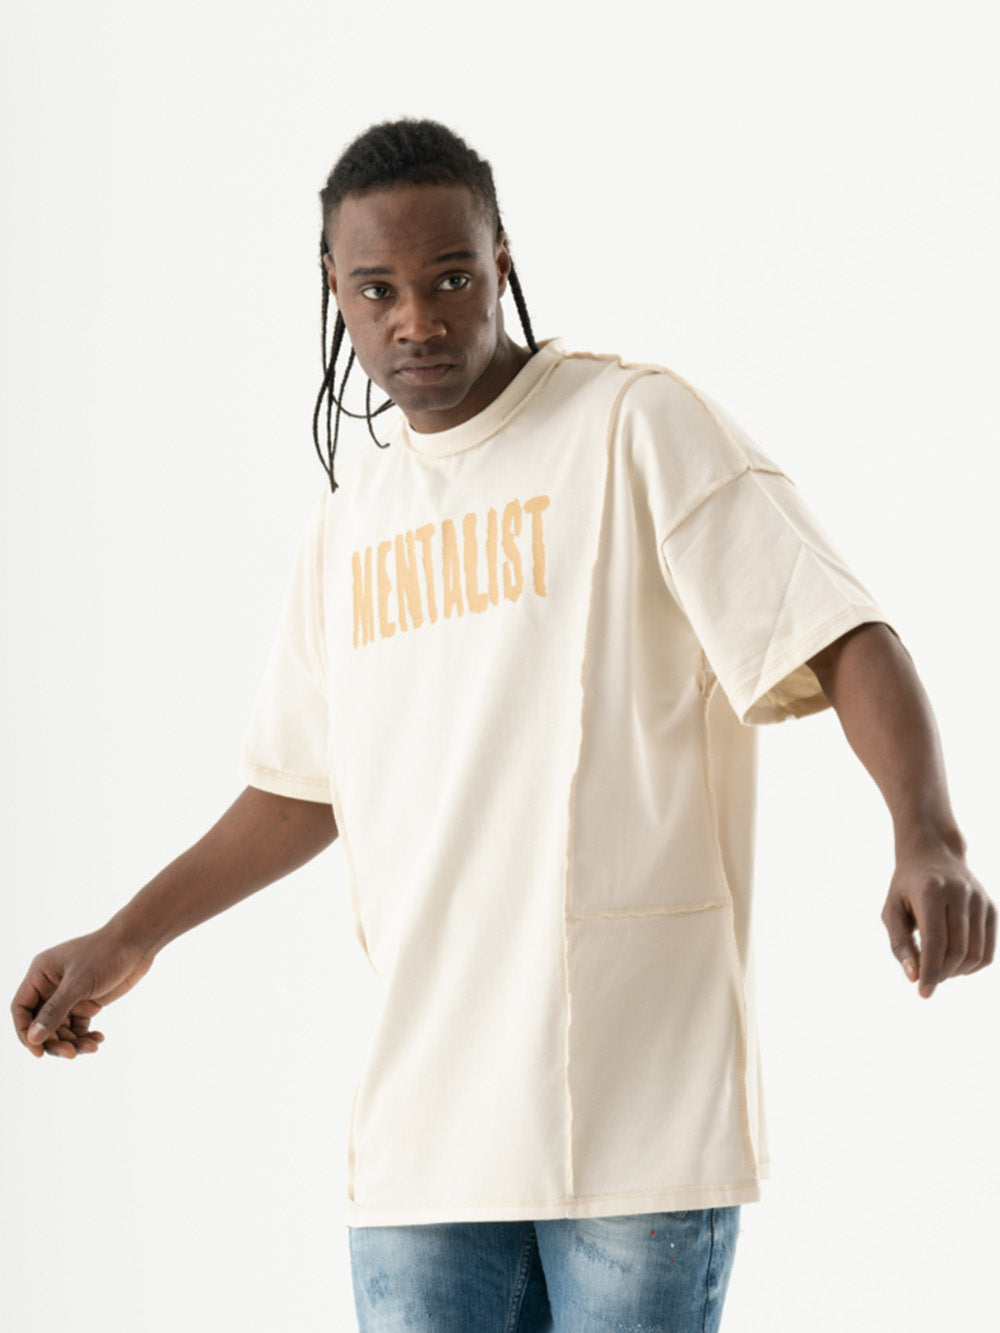 A man wearing a MENTALIST T-SHIRT | BEIGE with the word mentast on it.